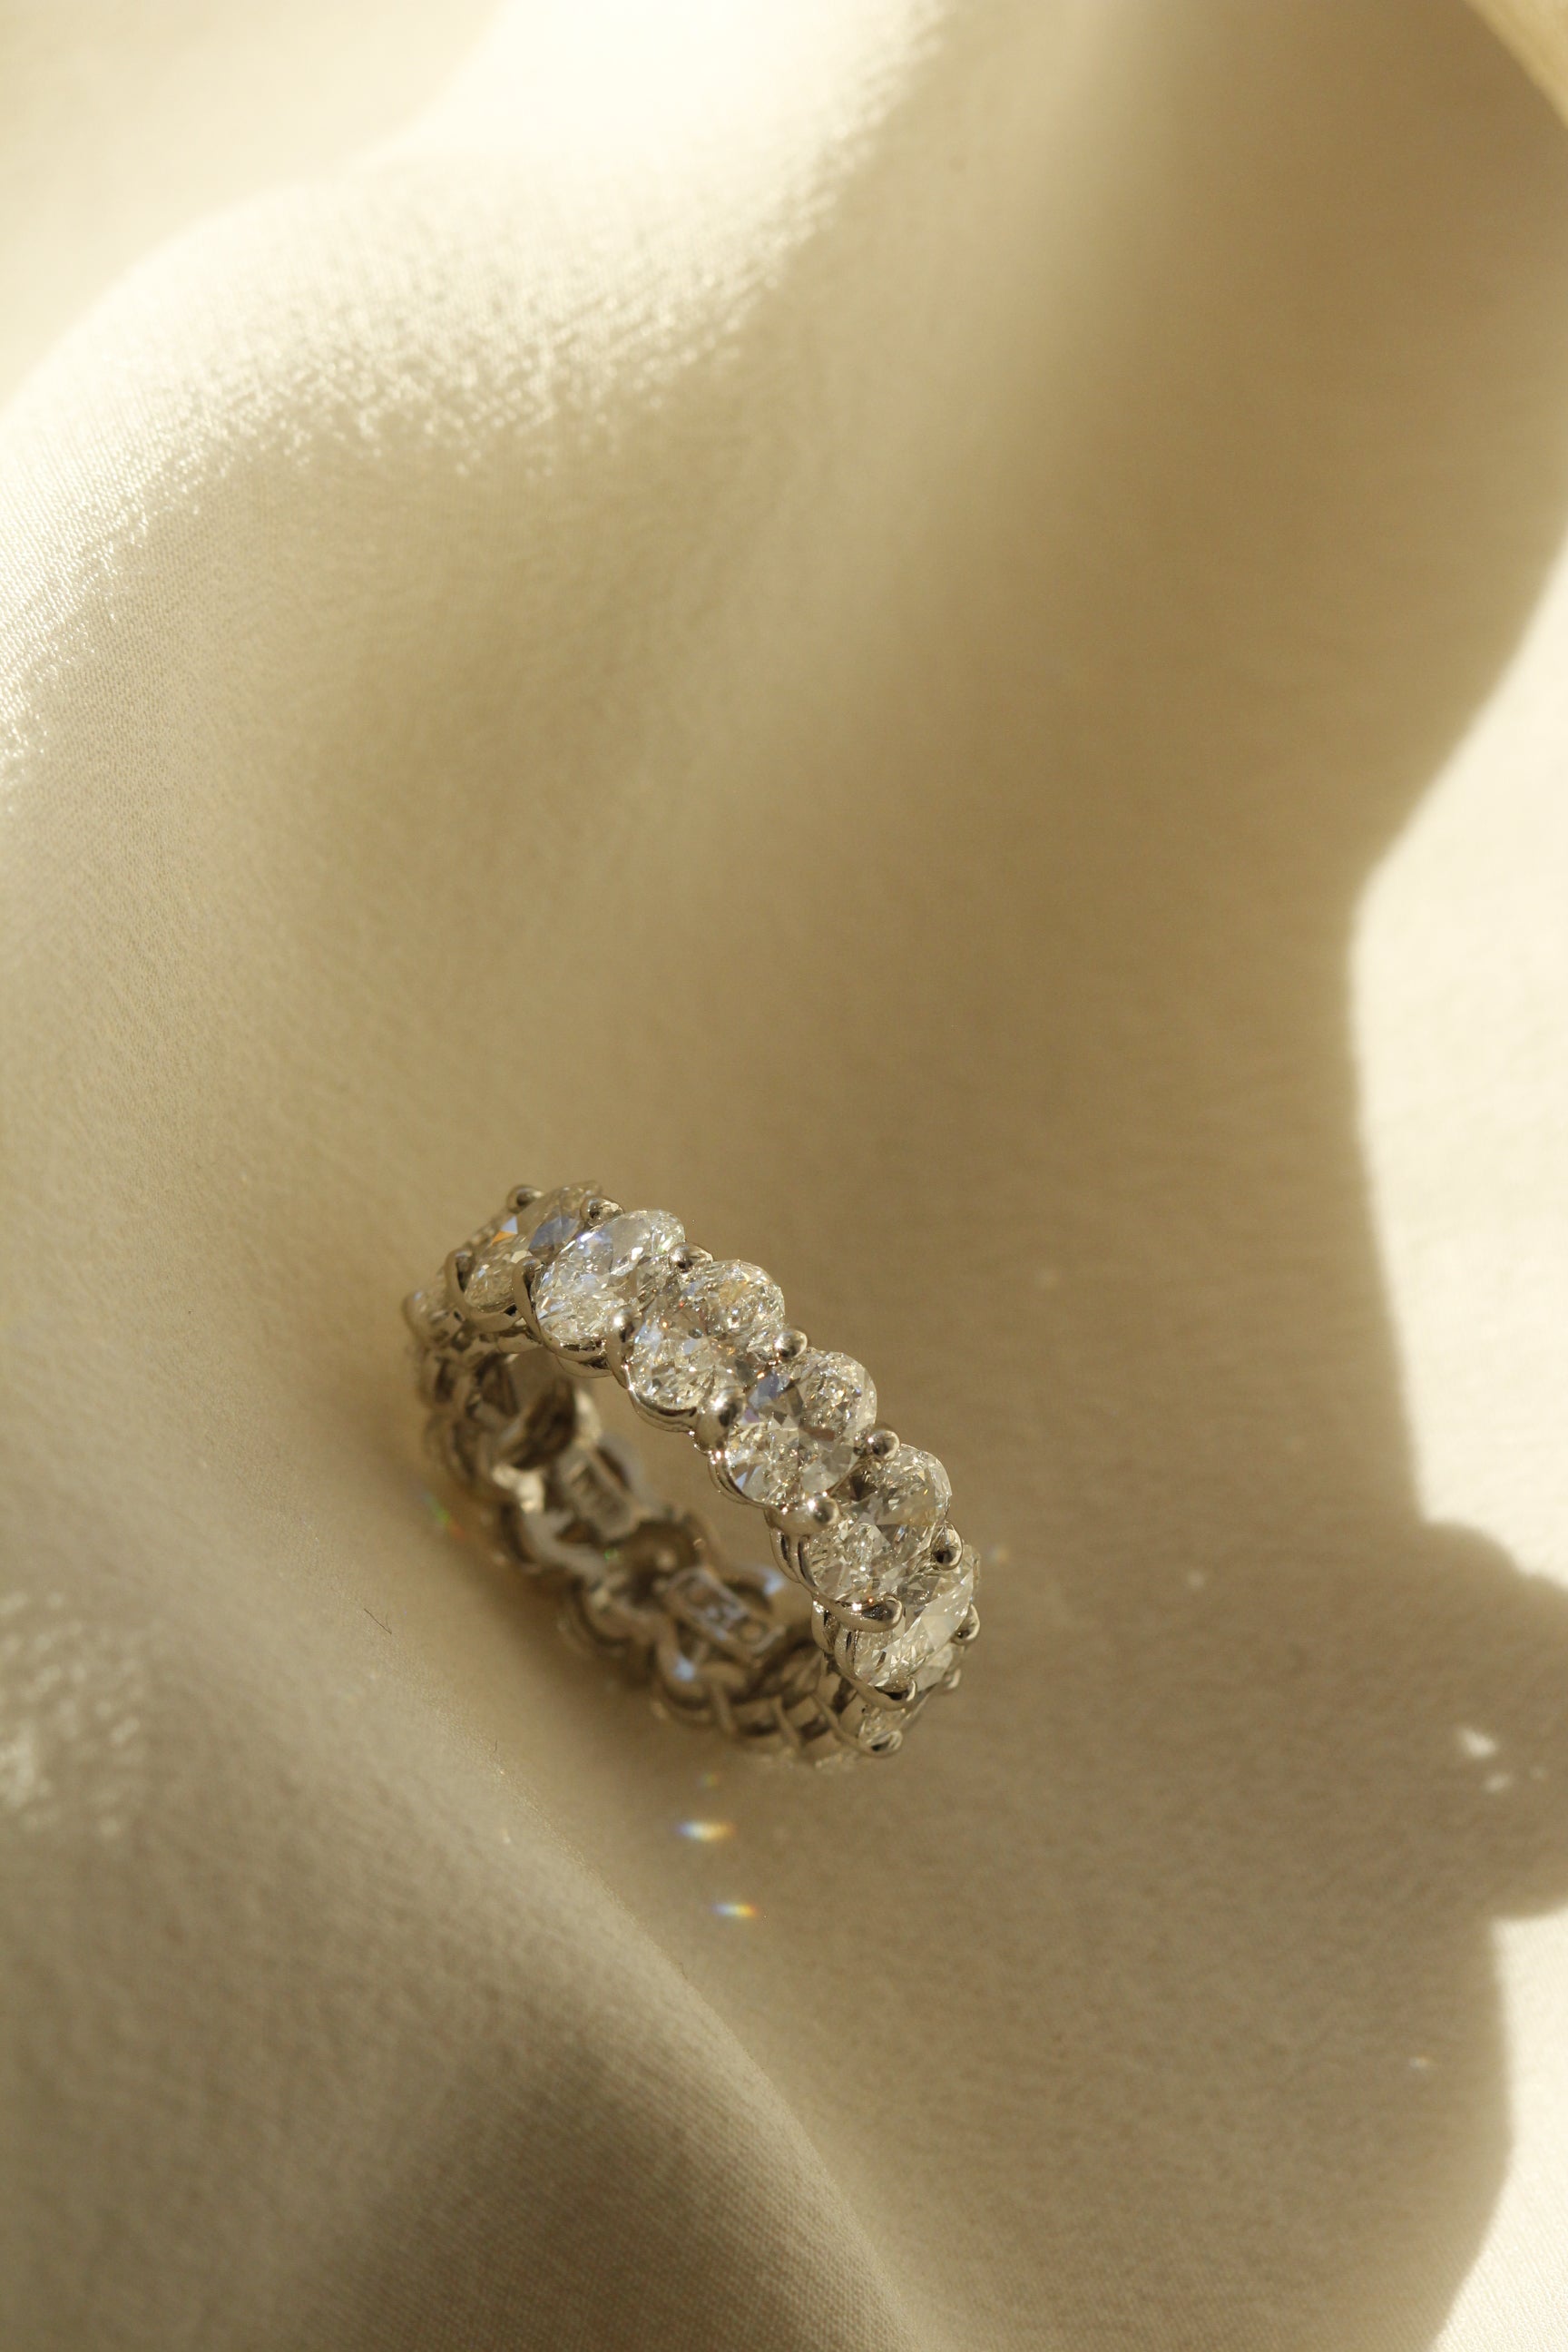 Infinity ring with 11 Oval cut diamonds set in platinum lying on fabric in the sun